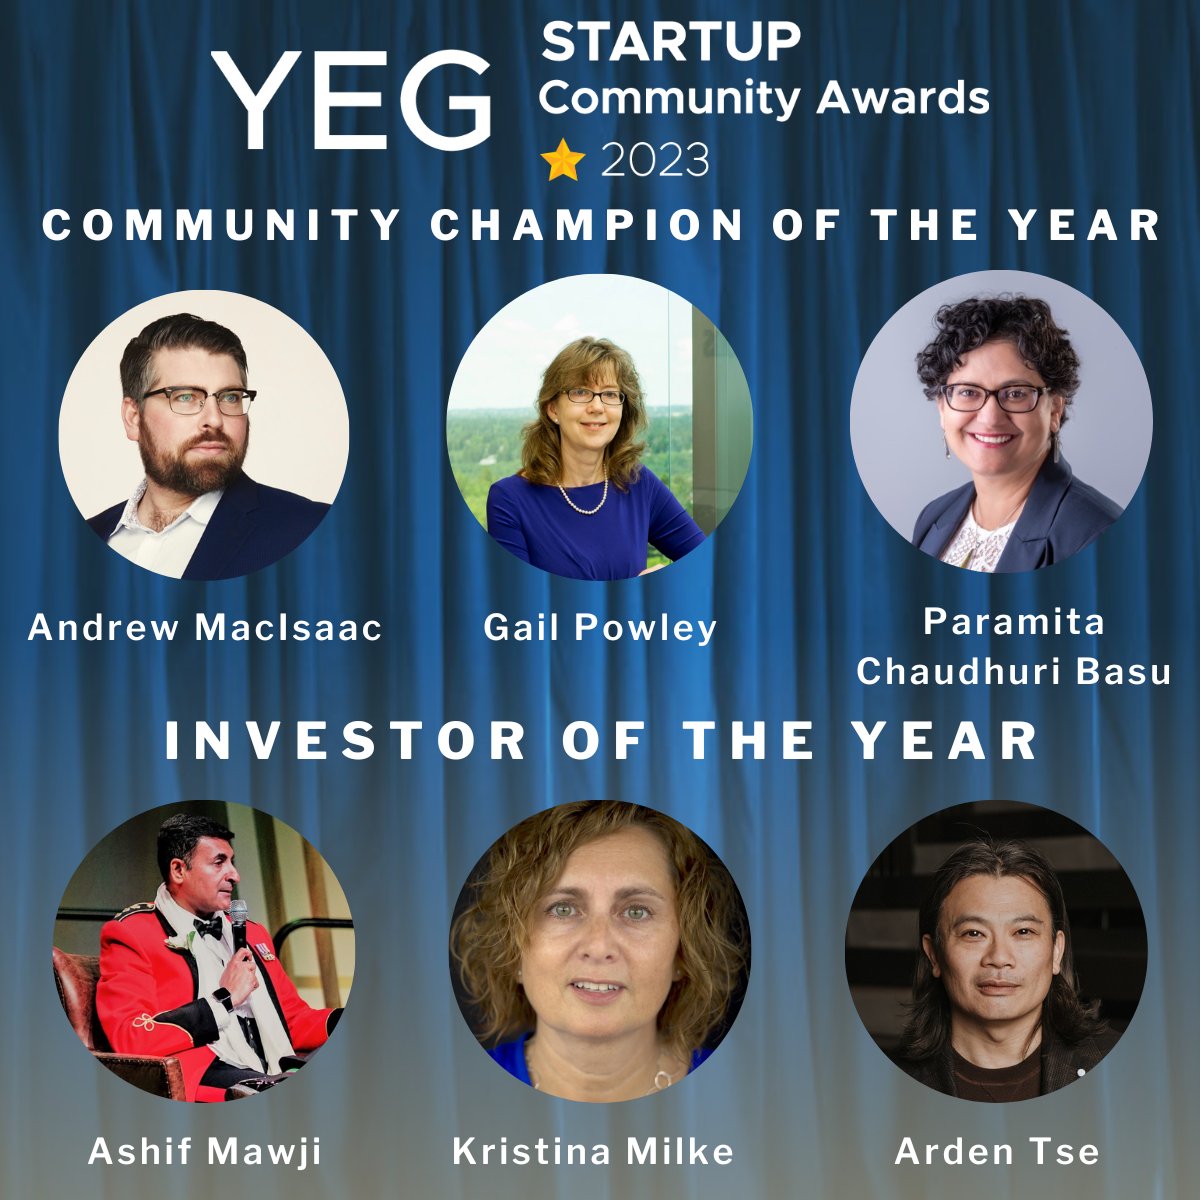 Check out this list of top nominees for the following awards:
Support Organization of the Year
Best Startup Workplace of the Year
Pivot of the Year
Community Champion of the Year
Investor of the Year

Look forward to celebrating their accomplishments on May 10th!

#yegawards